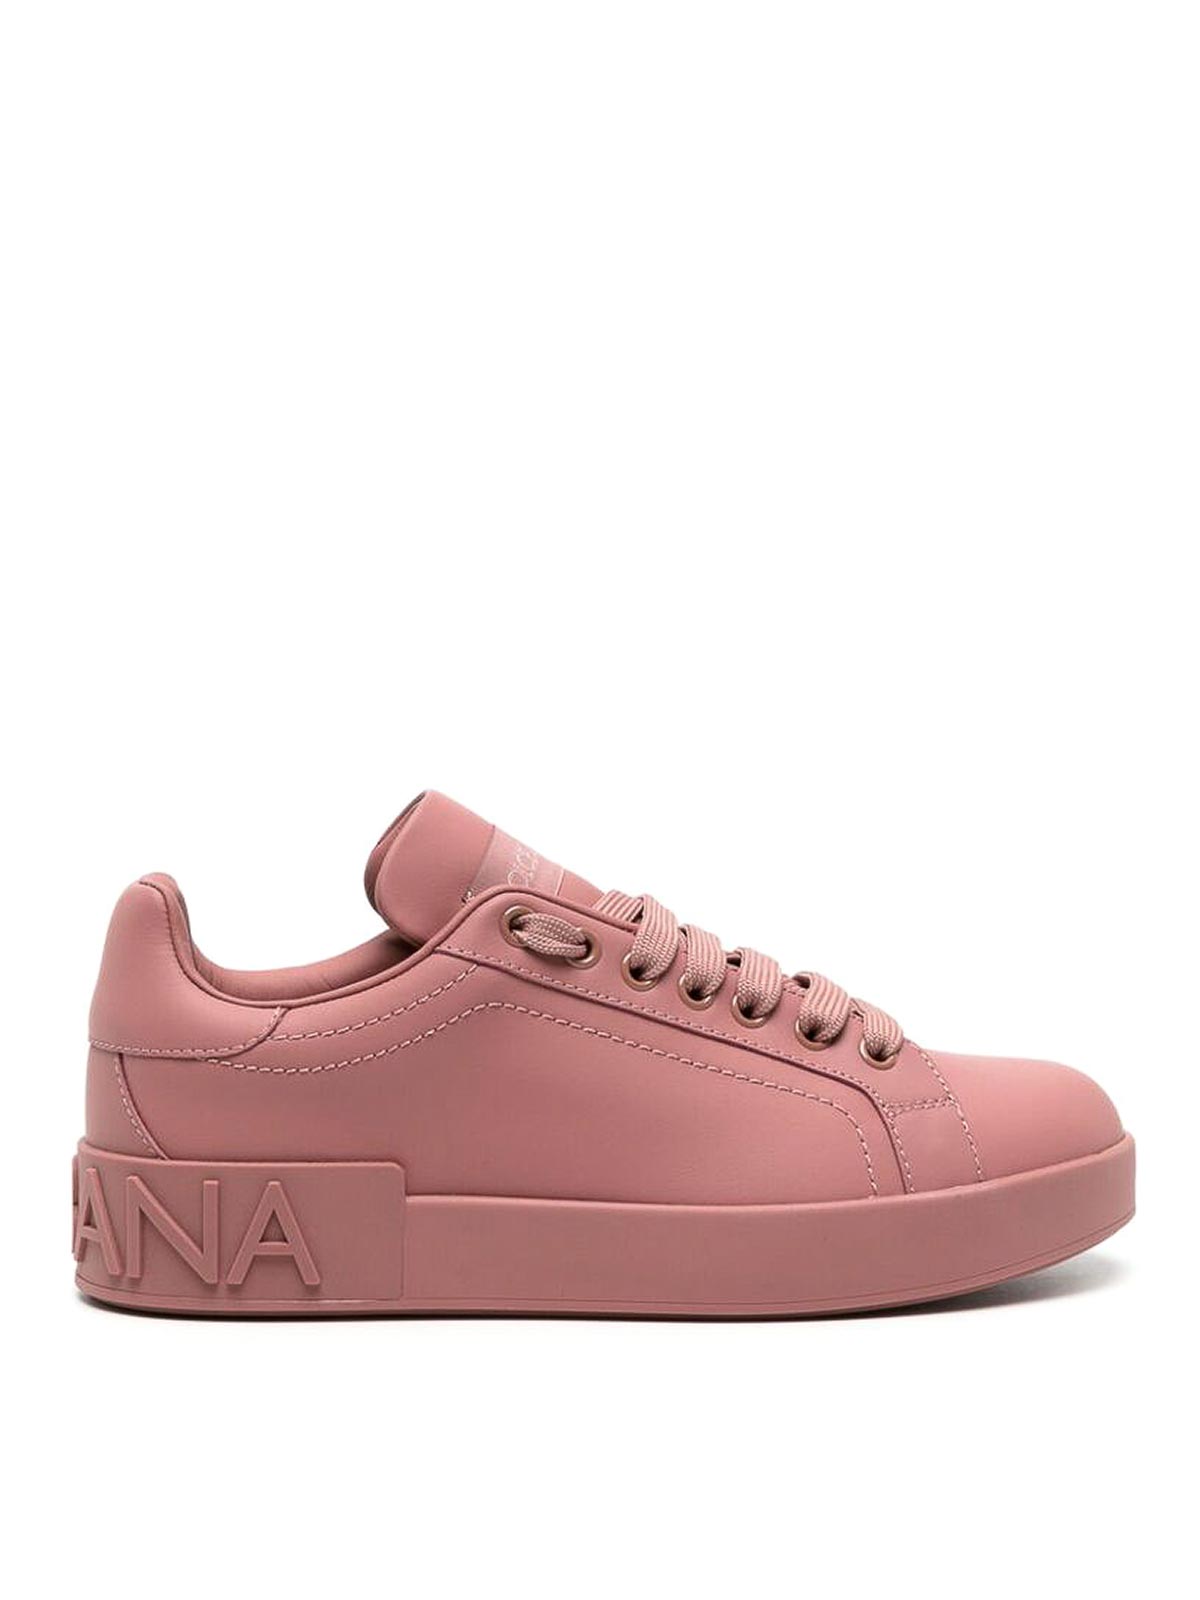 Dolce & Gabbana Embossed-logo Leather Sneakers In Nude & Neutrals